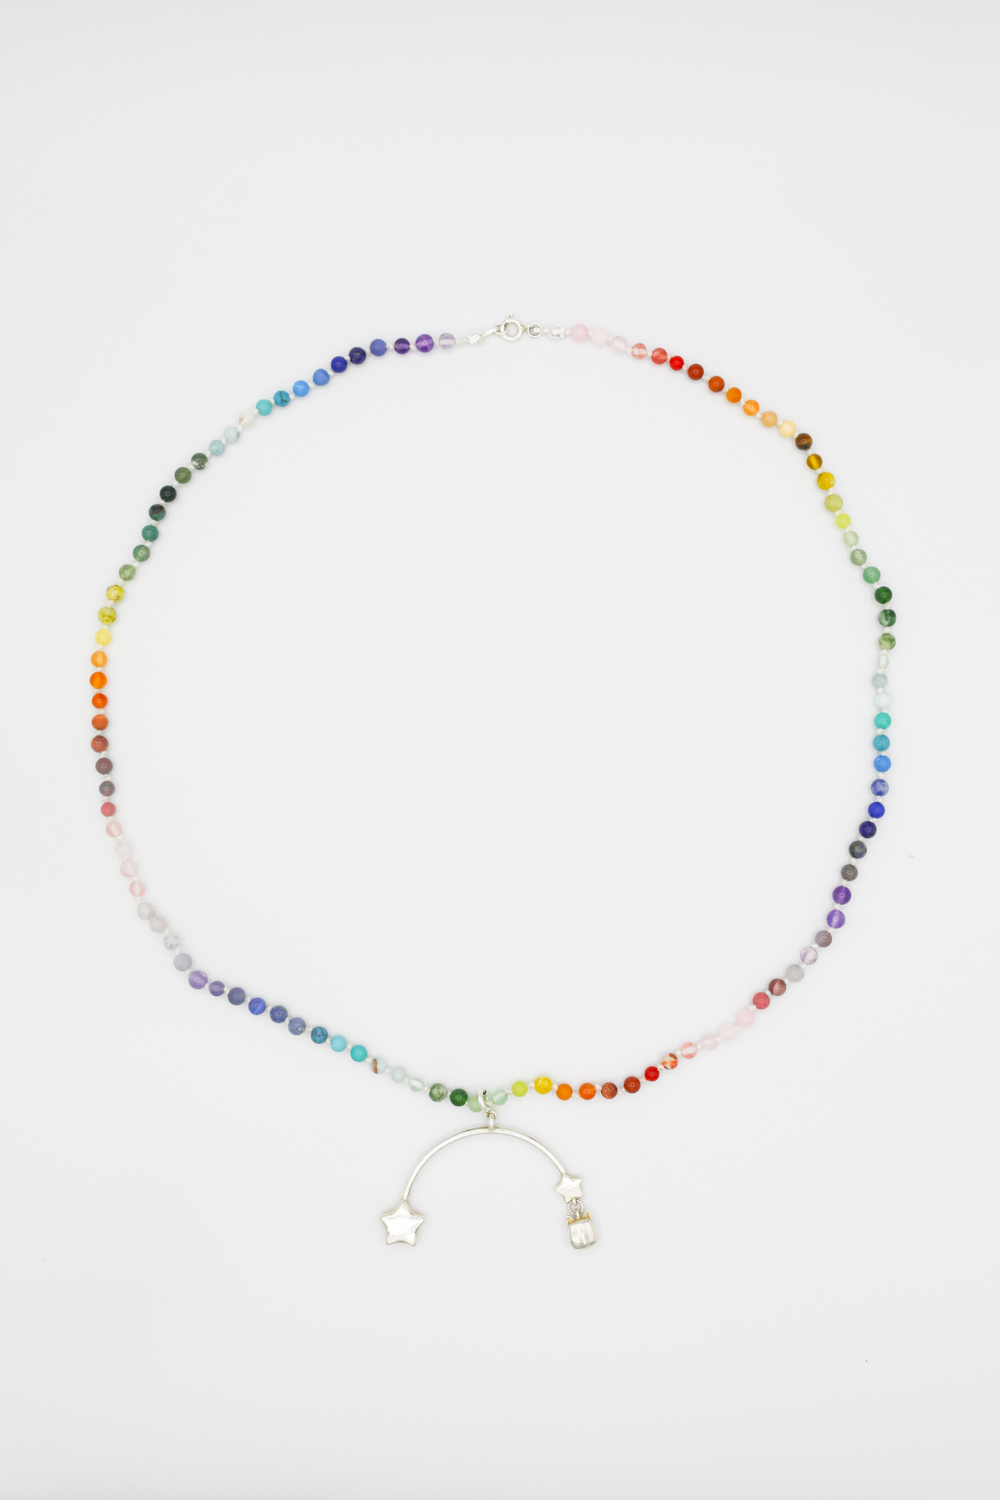 Grand Rainbow Bridge and The Petite Cat Knotted Bead Necklace